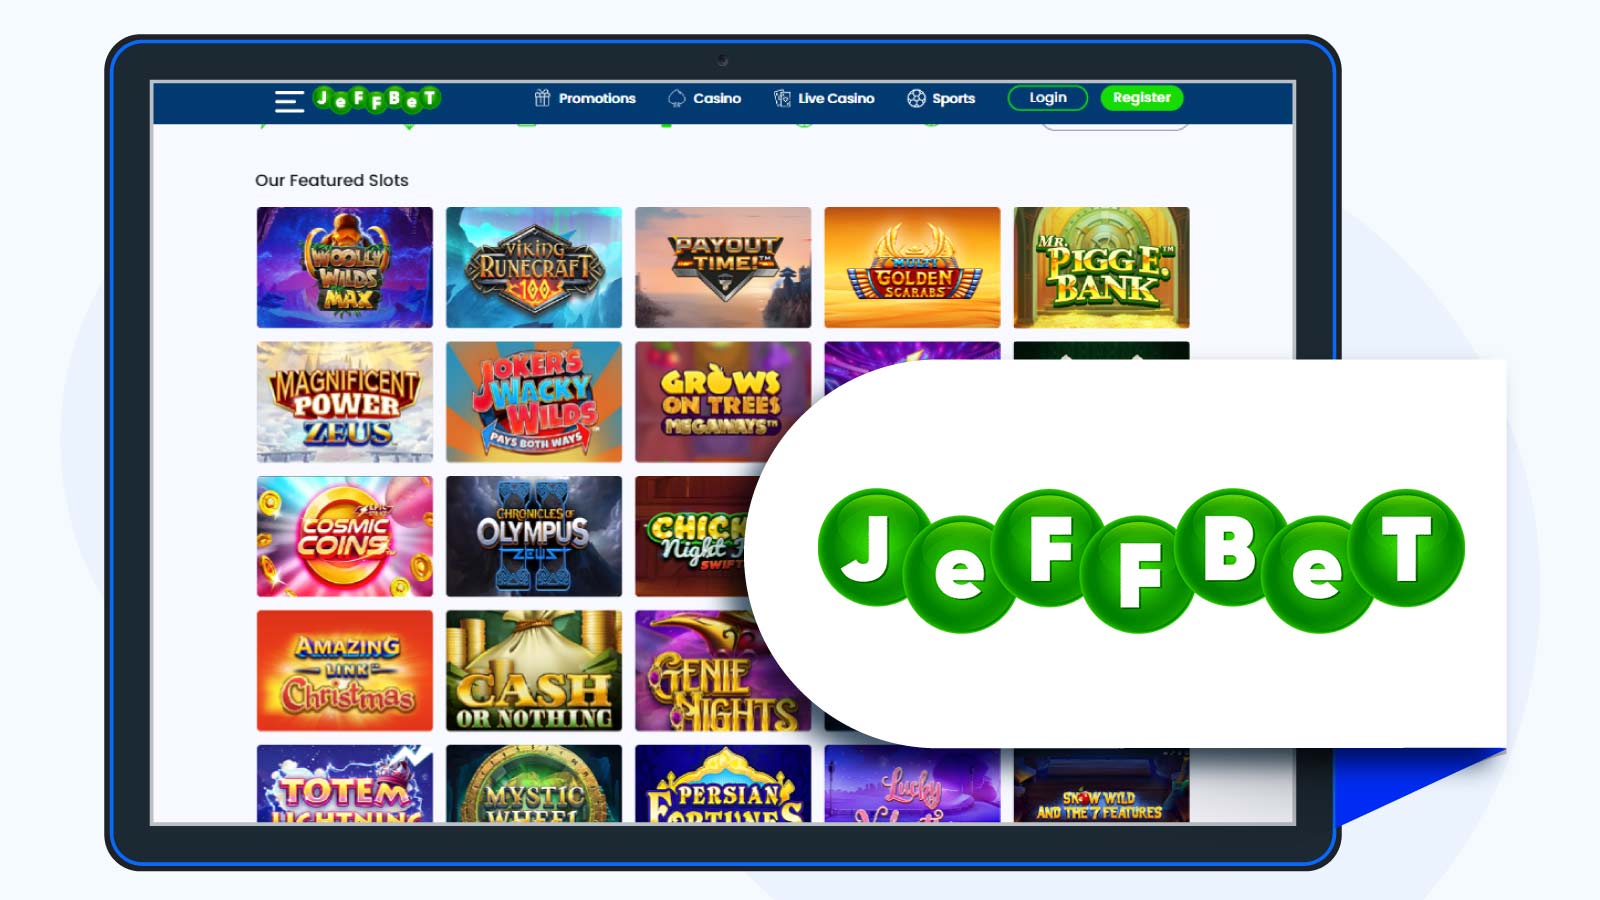 JeffBet-Casino-New-Slot-Site-With-the-Most-Licenses